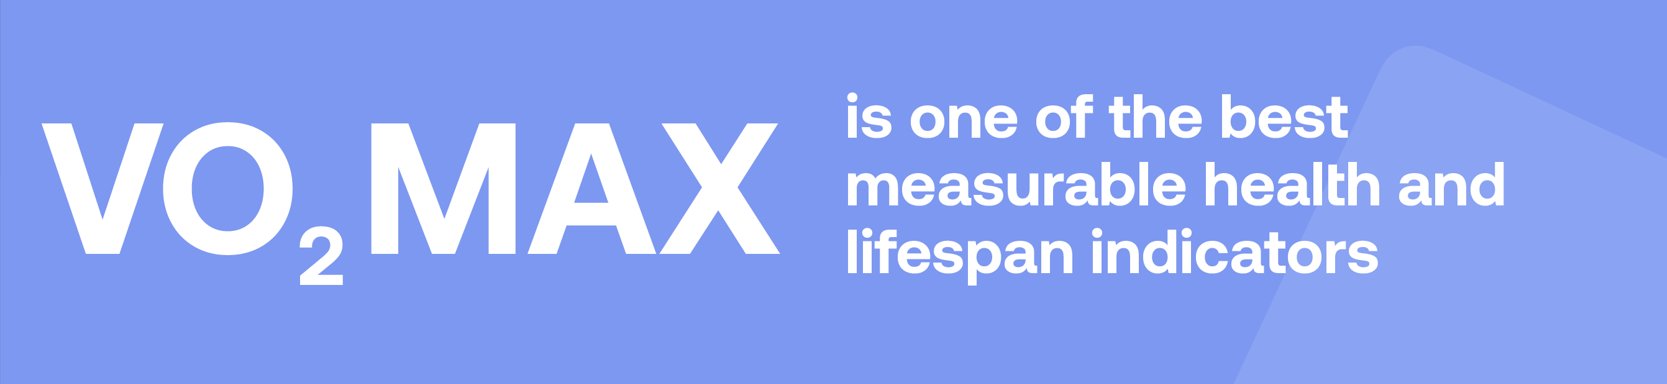 VO₂ MAX is one of the best measurable health and lifespan indicators